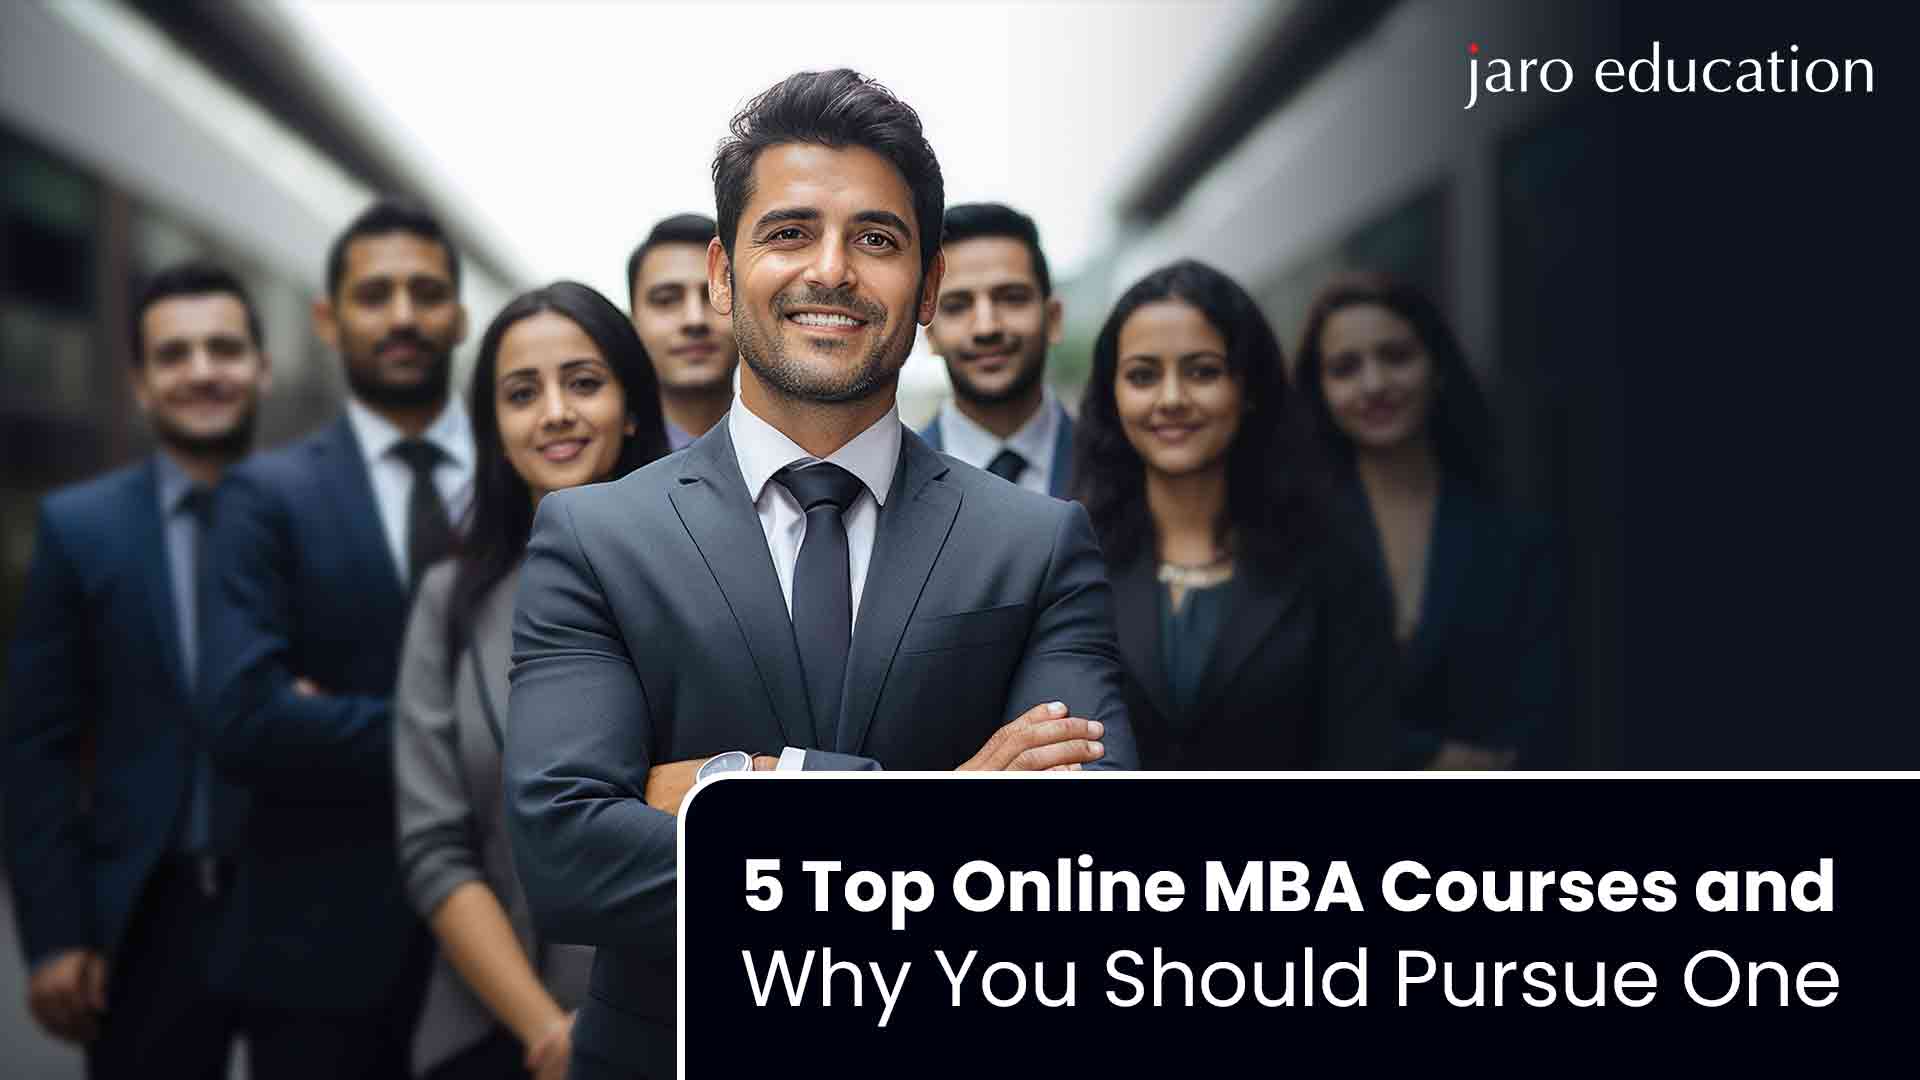 5-Top-Online-MBA-Courses-and-Why-You-Should-Pursue-One